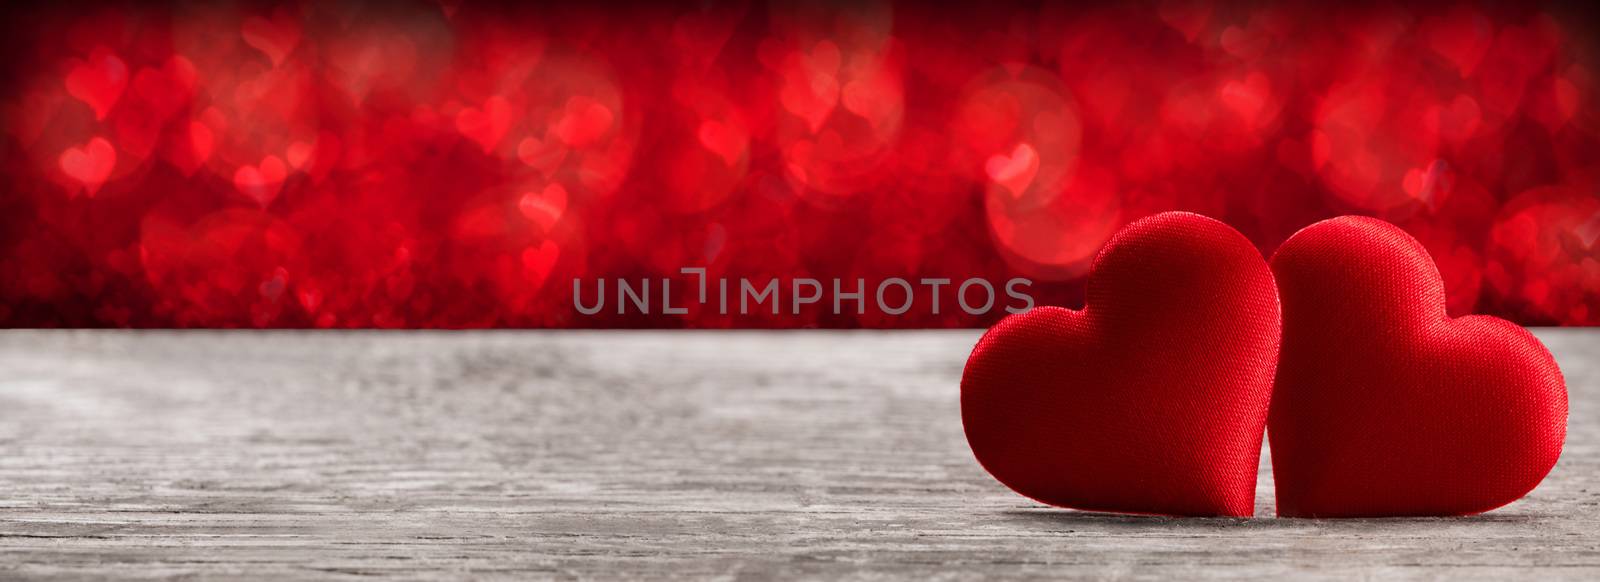 Valentines day hearts background by Yellowj